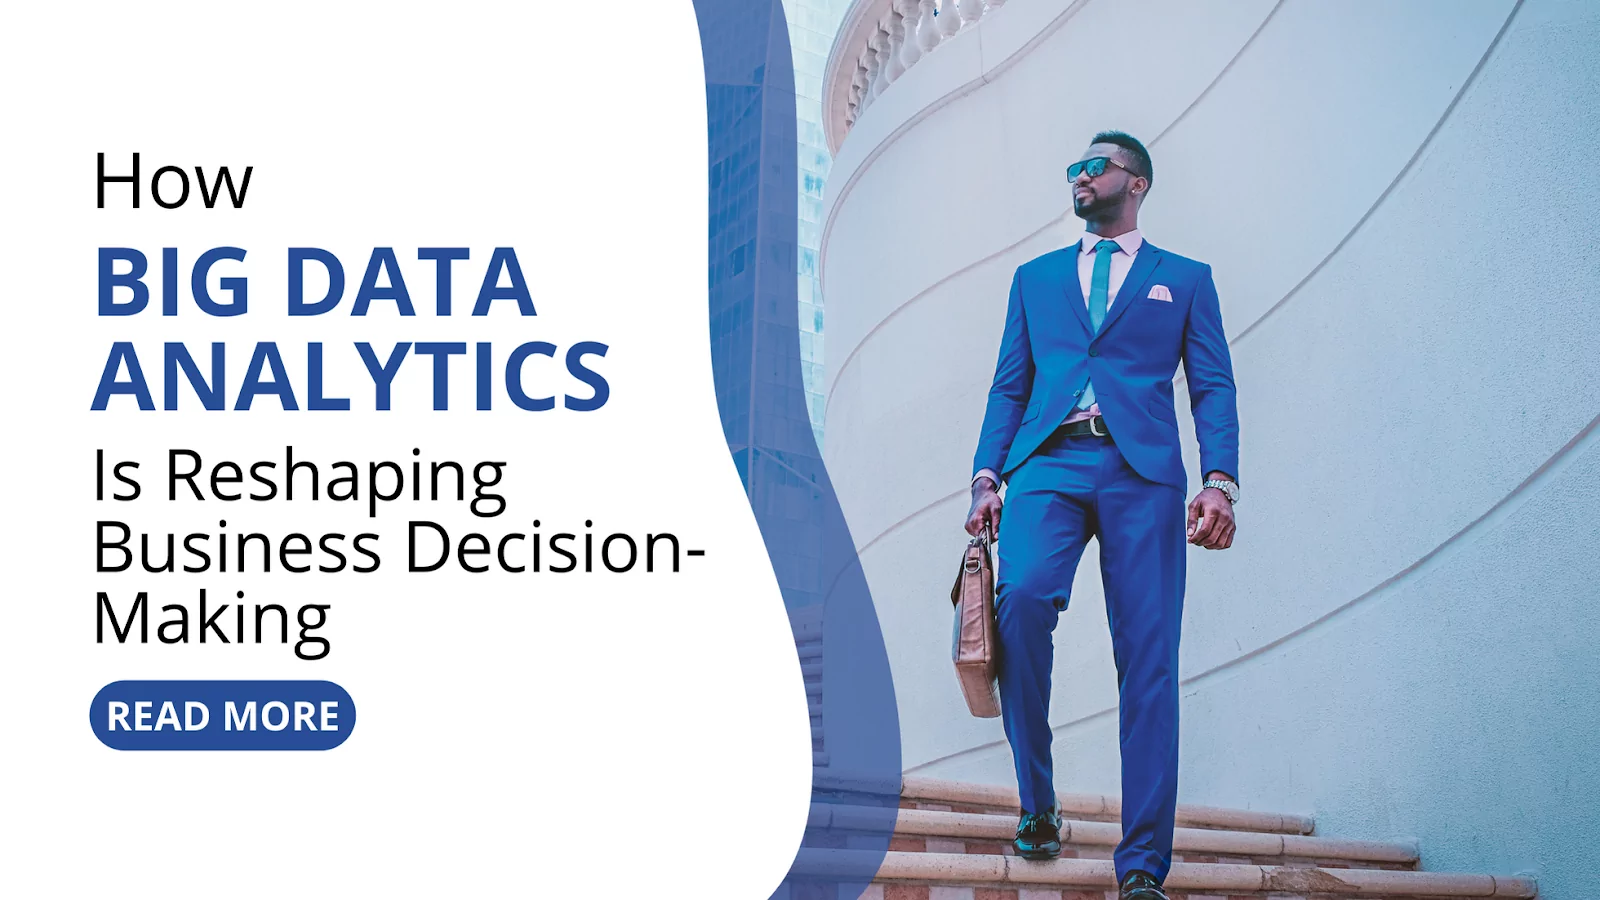 How Big Data Analytics Is Reshaping Business Decision-Making